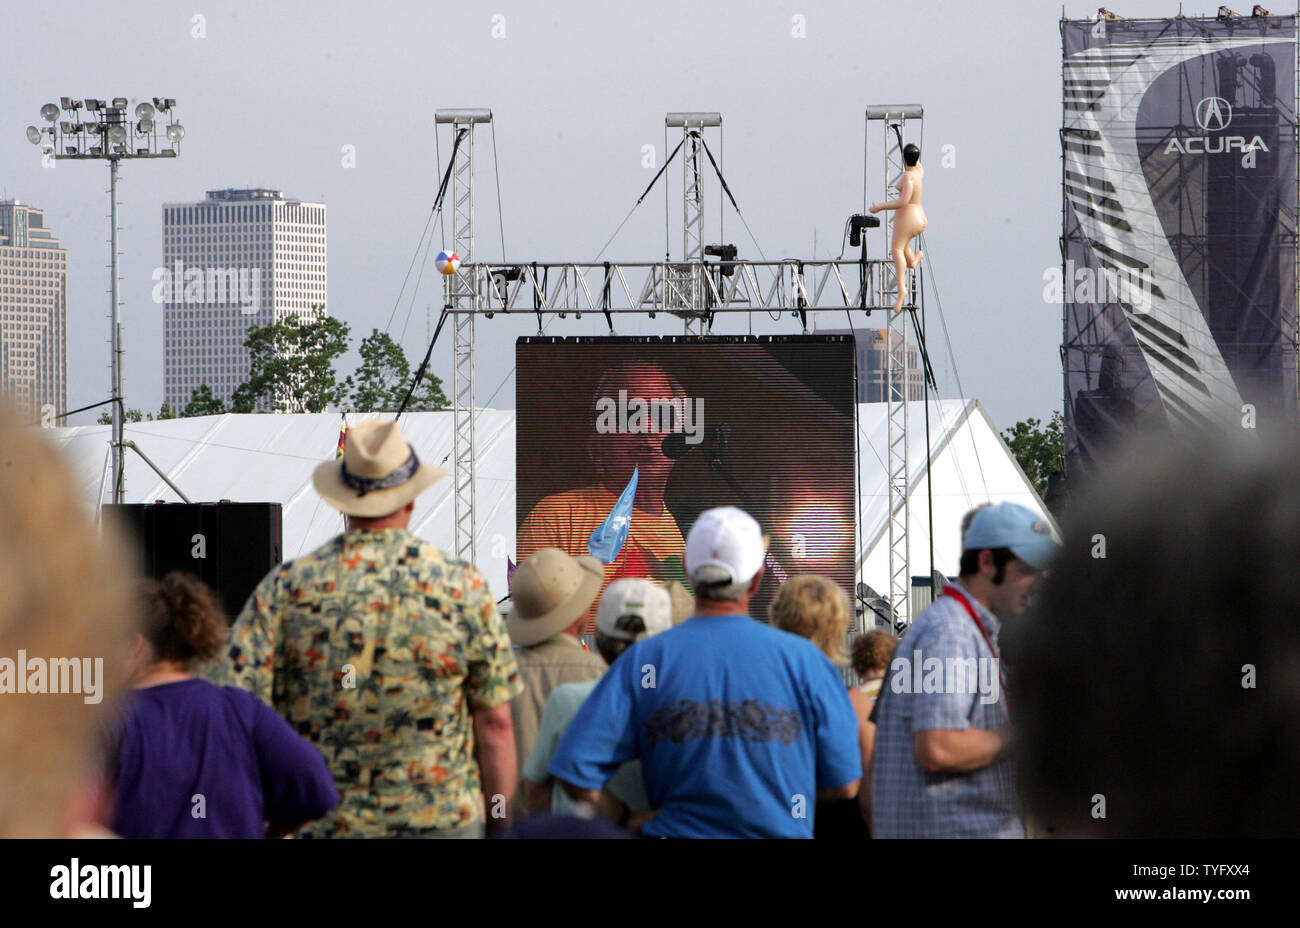 Jimmy Buffett's image appears on a big screen as he performs during the 2006 New Orleans Jazz & Heritage Festival at the New Orleans Fair Grounds May 6, 2006. The festival is the first major musical event to be held in New Orleans since Hurricane Katrina devastated the area last year, leaving vast parts of the city still uninhabitable.   (UPI Photo/Judi Bottoni) Stock Photo